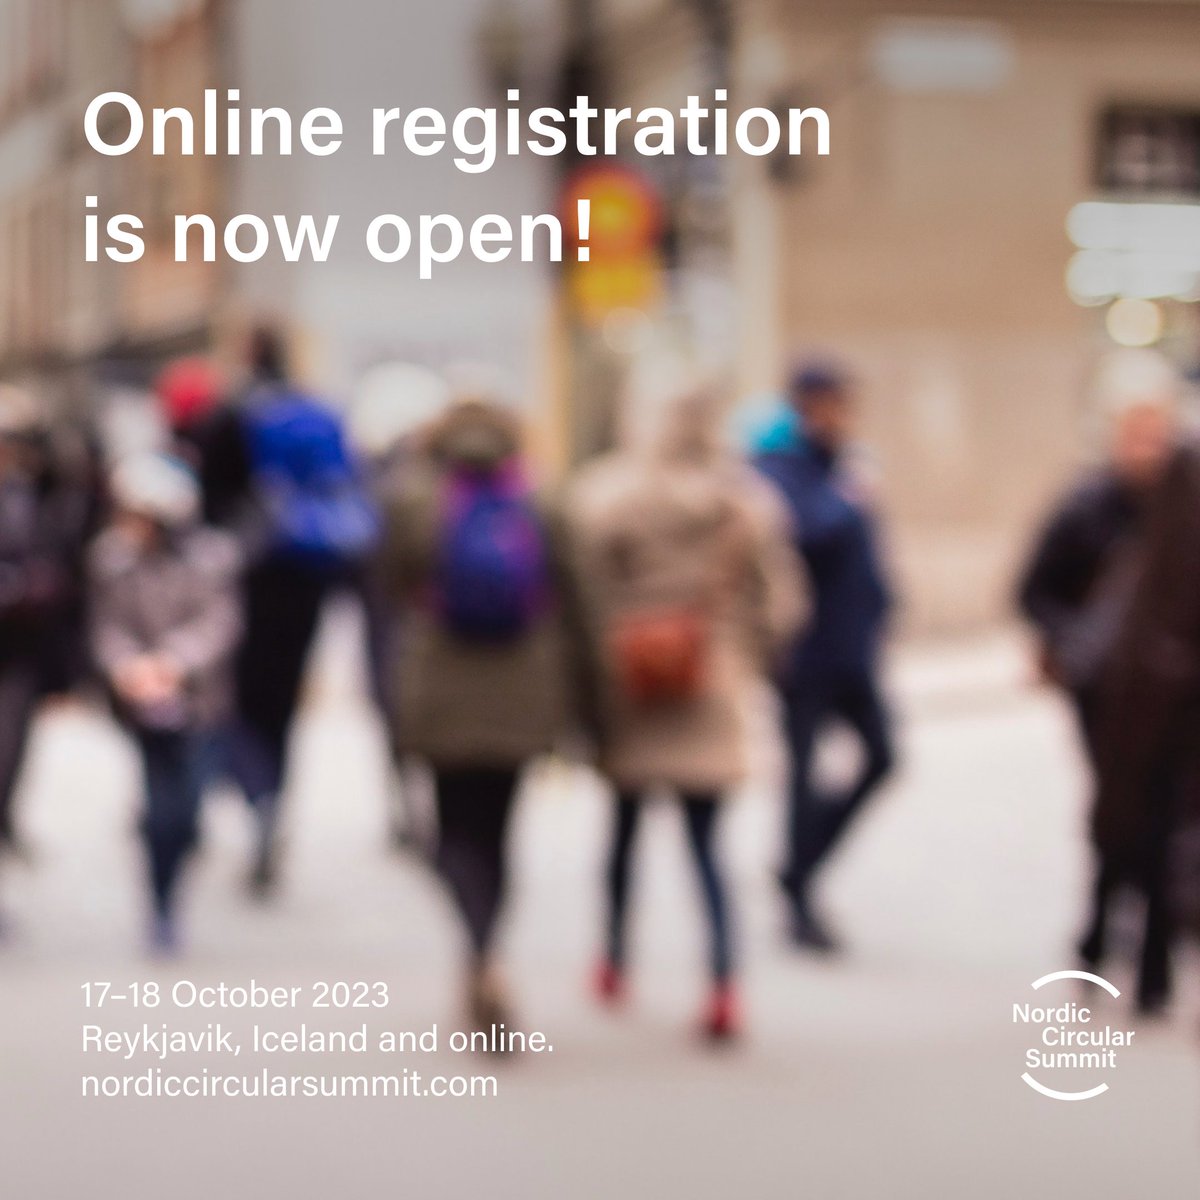 Online registration is now open for Nordic Circular Summit 2023, taking place 17–18 October.

Digital participation is free and open to all. See you there! Register here: 
app.myonvent.com/event/nordic-c…

#NordicCircularSummit #NCS2023 #CircularEconomy #CircularNordic